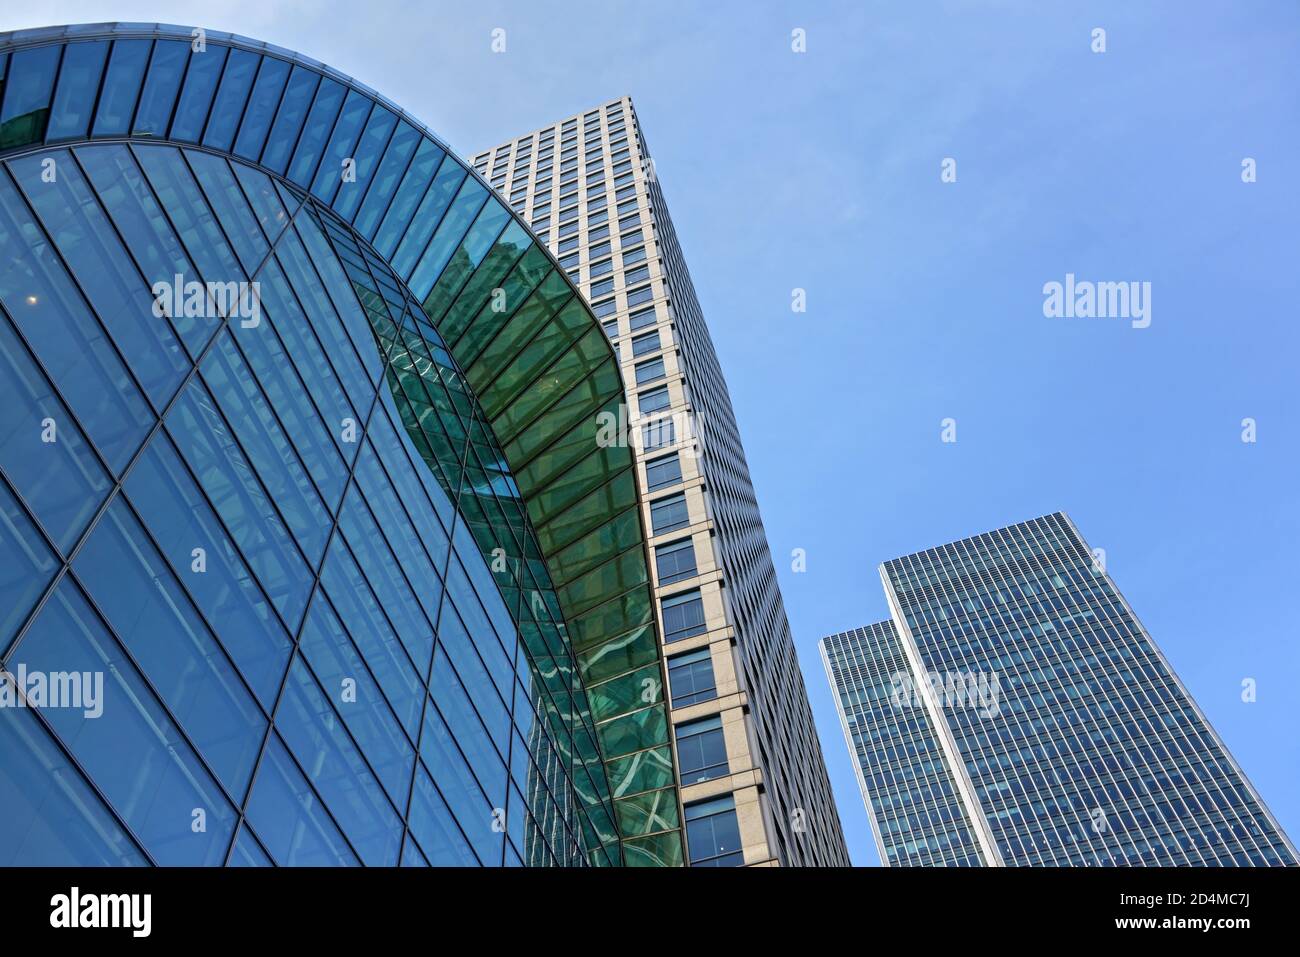 London, United Kingdom - February 03, 2019: Looking up Canada Water tube station entrance and 40 and 25 Bank Street buildings designed by Cesar Pelli Stock Photo